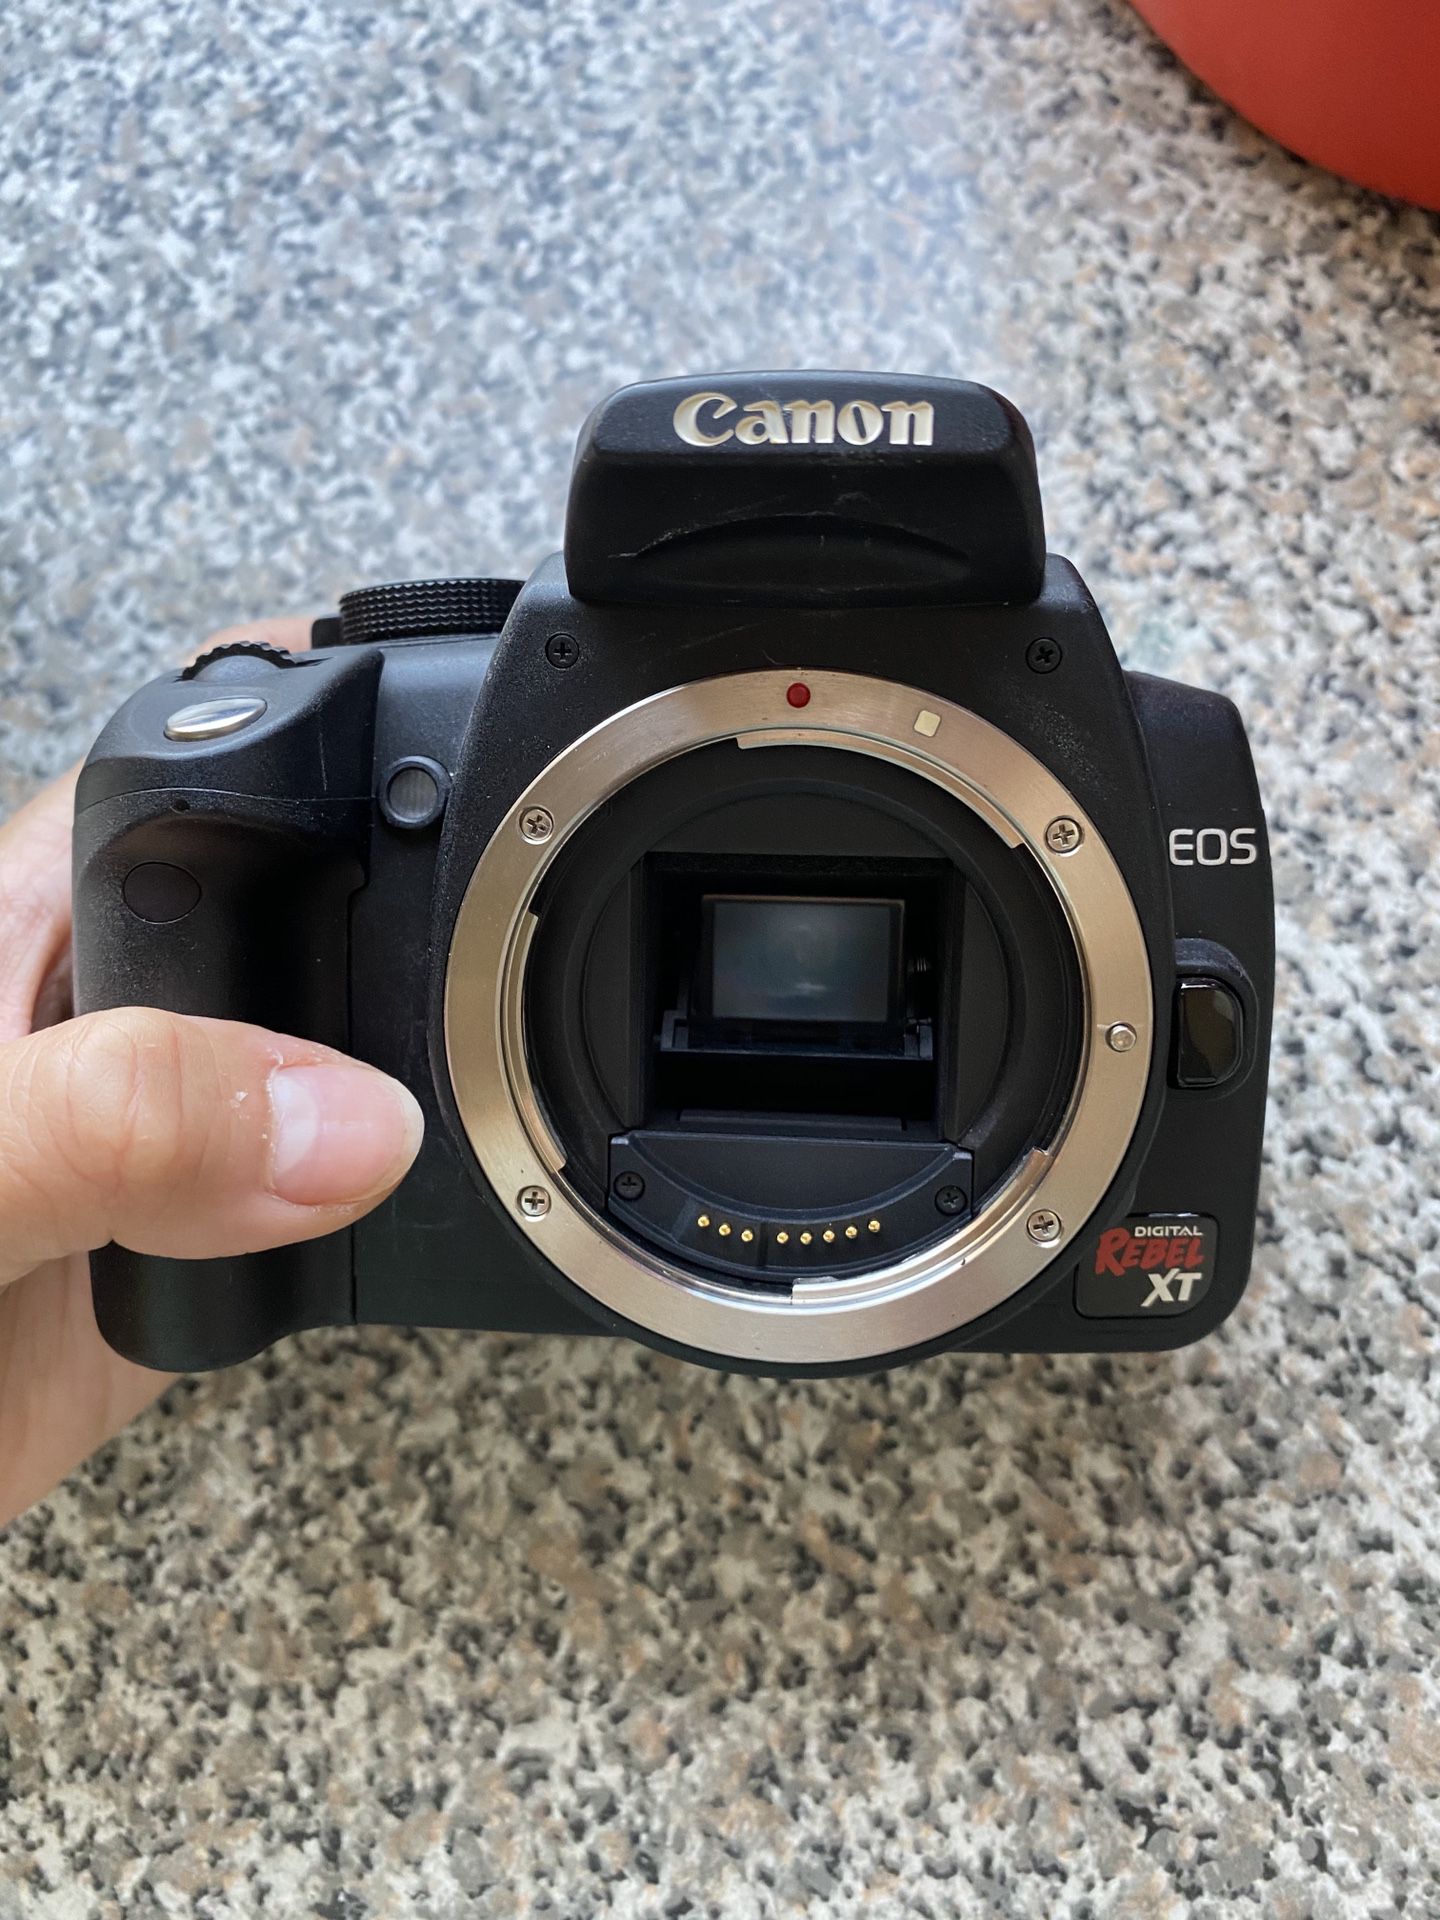 Canon EOS Digital Rebel XT camera with EF-S 18-55 mm 1:3.5-5.6 IS lens